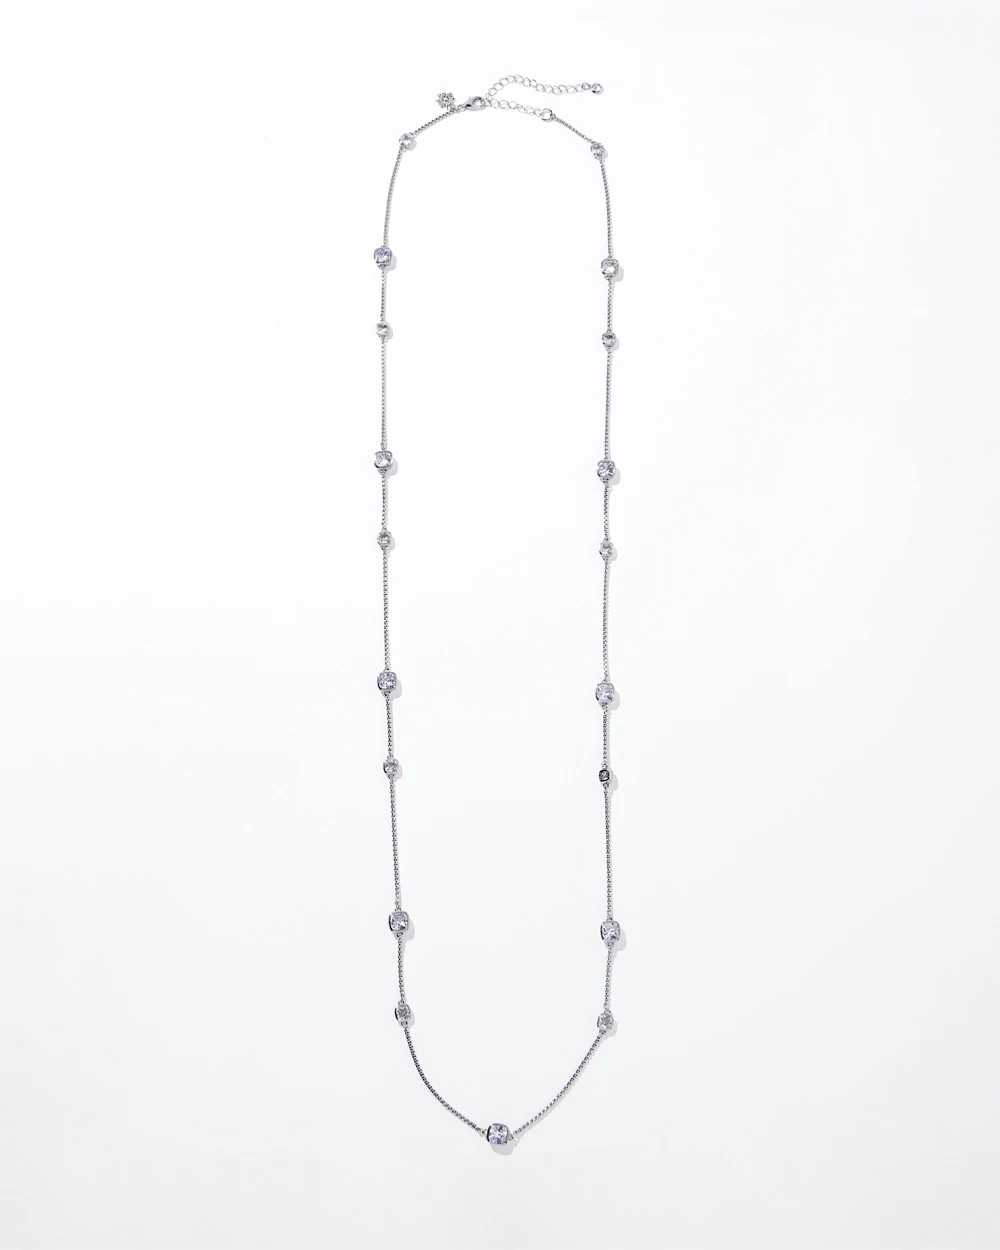 Silver Clear Branded Long Necklace click to view larger image.